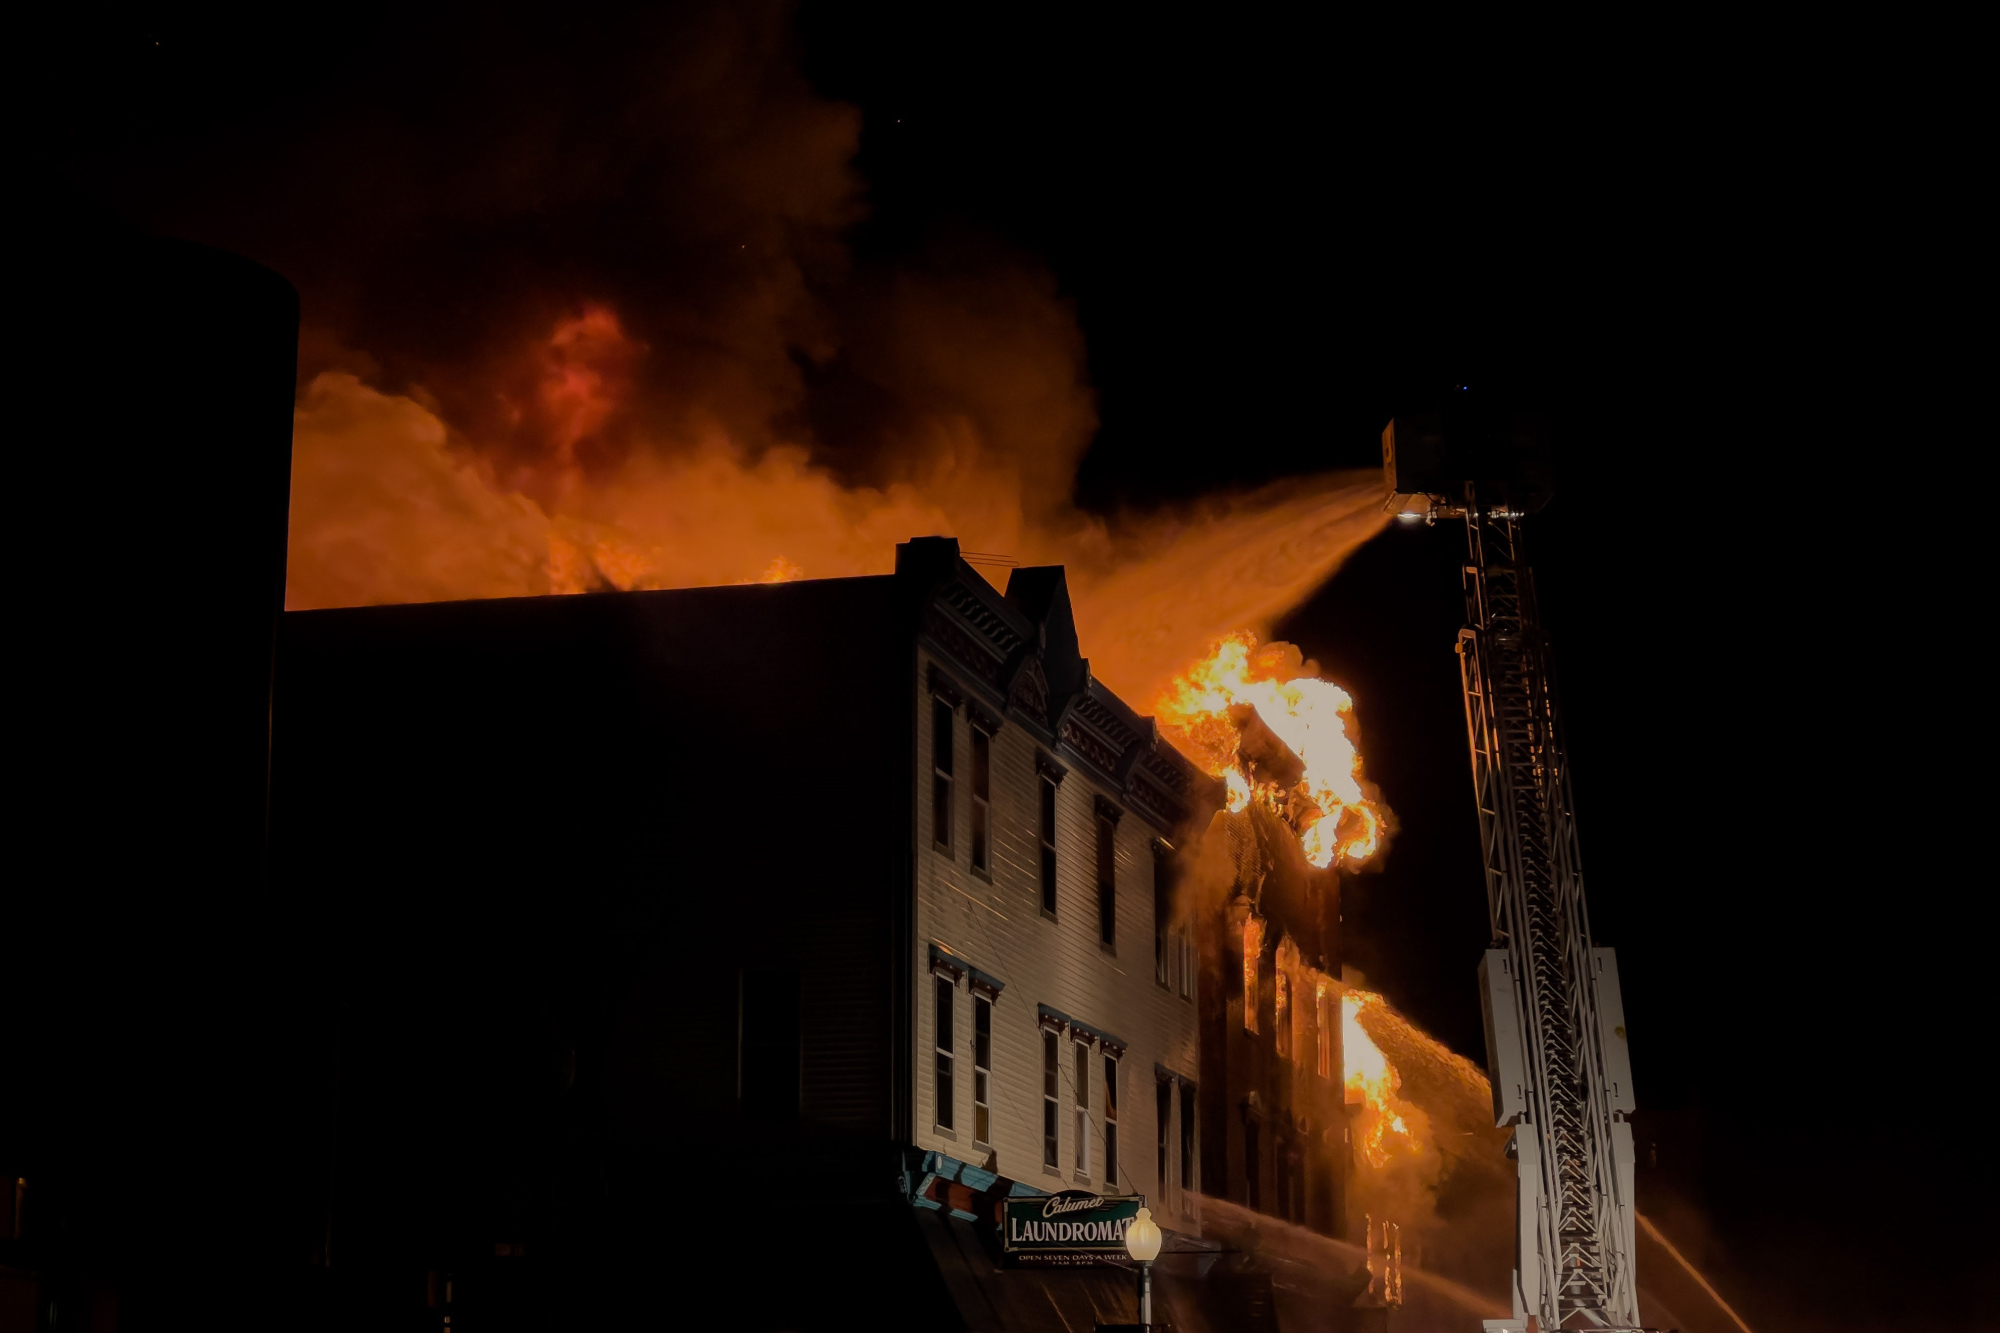 What is the environmental impact of fire? Click to find out more about the cost of a burning building and the effects it holds.